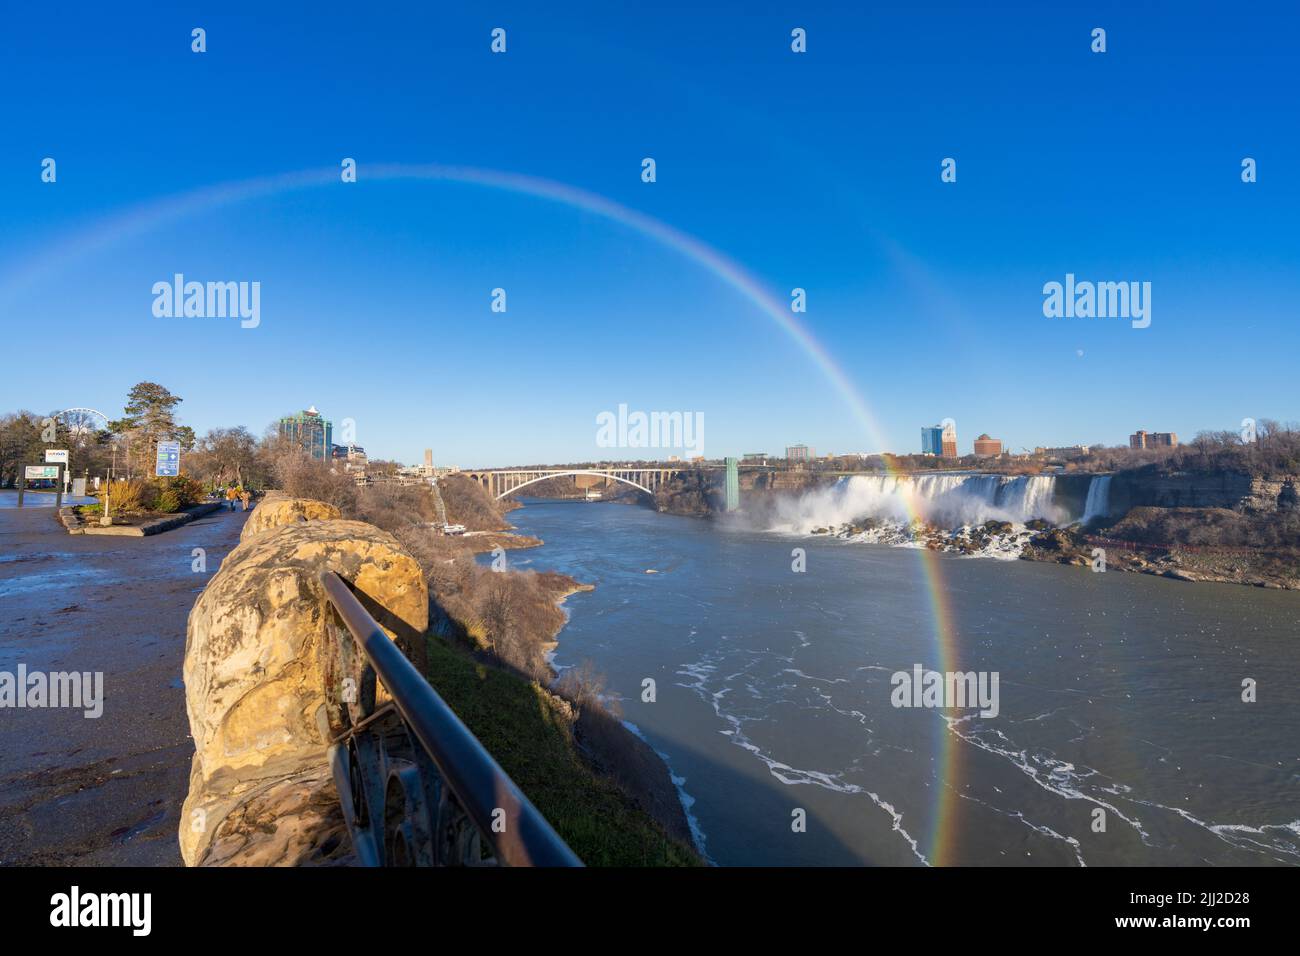 Niagara Falls, Ontario, Canada - December 13 2021 : Fallsview Trail in a sunny day with double rainbow. American Falls in the background. Stock Photo